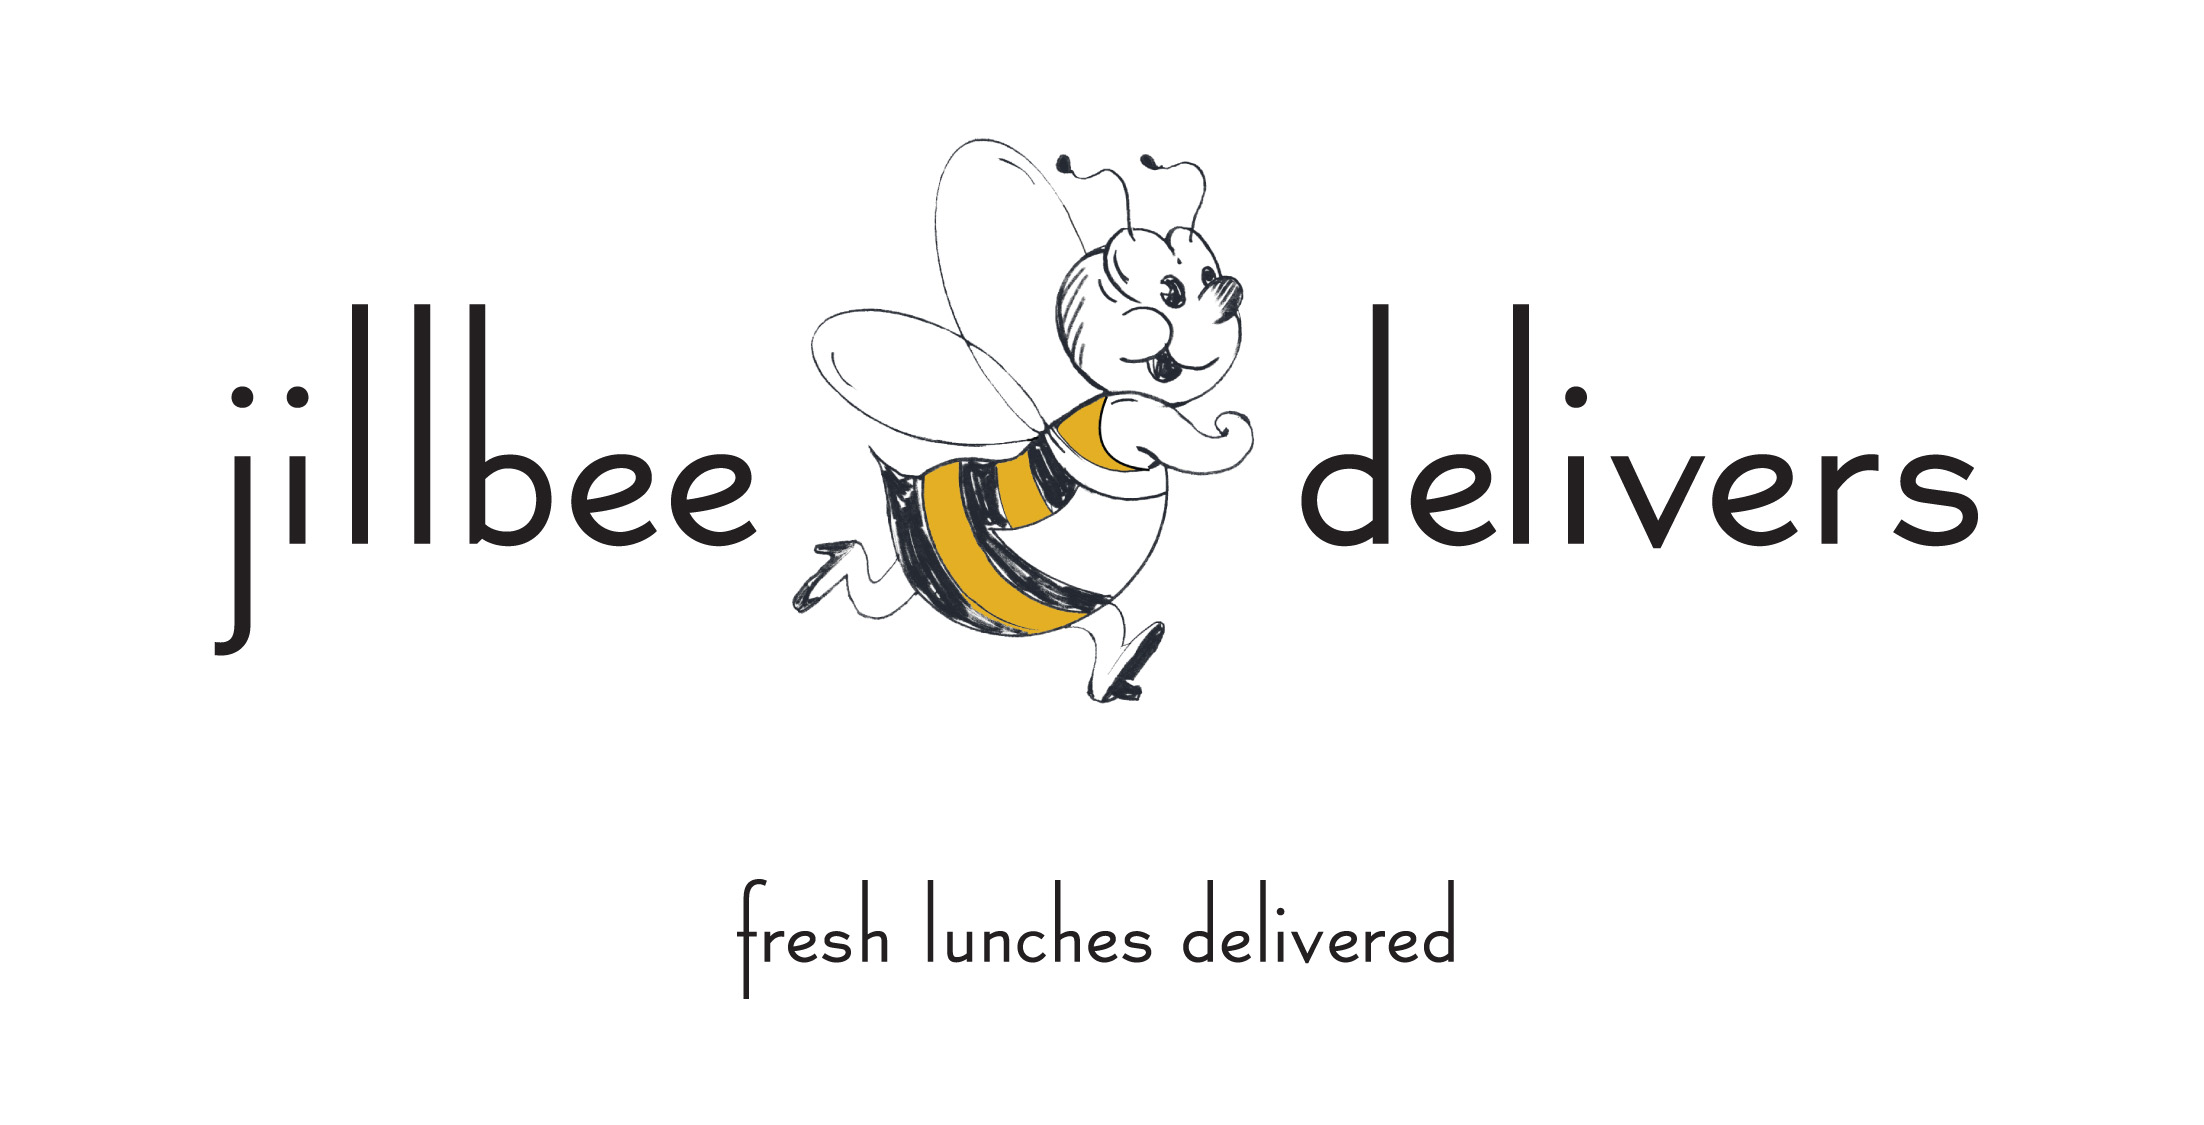 Jillbee Fresh Lunches Delivered.